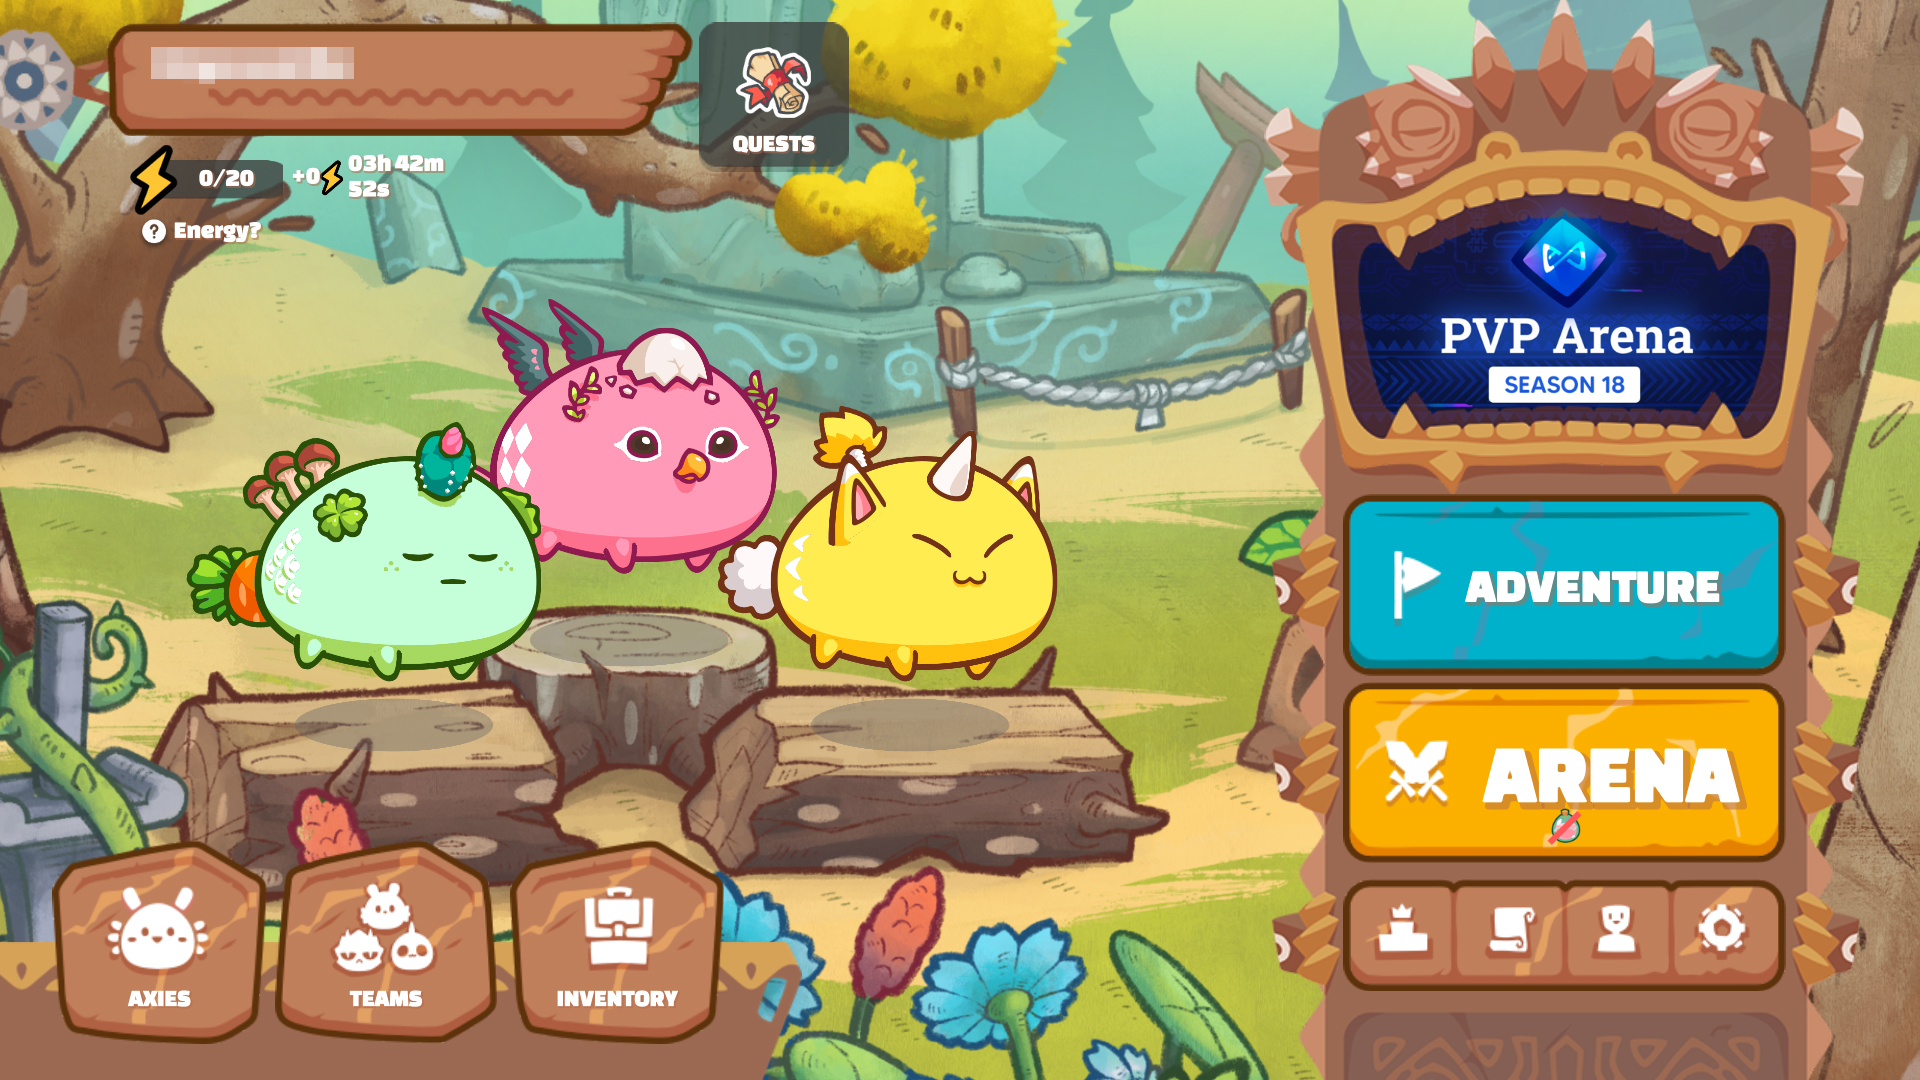 Axie Infinity is the NFT game everyone wants to copy